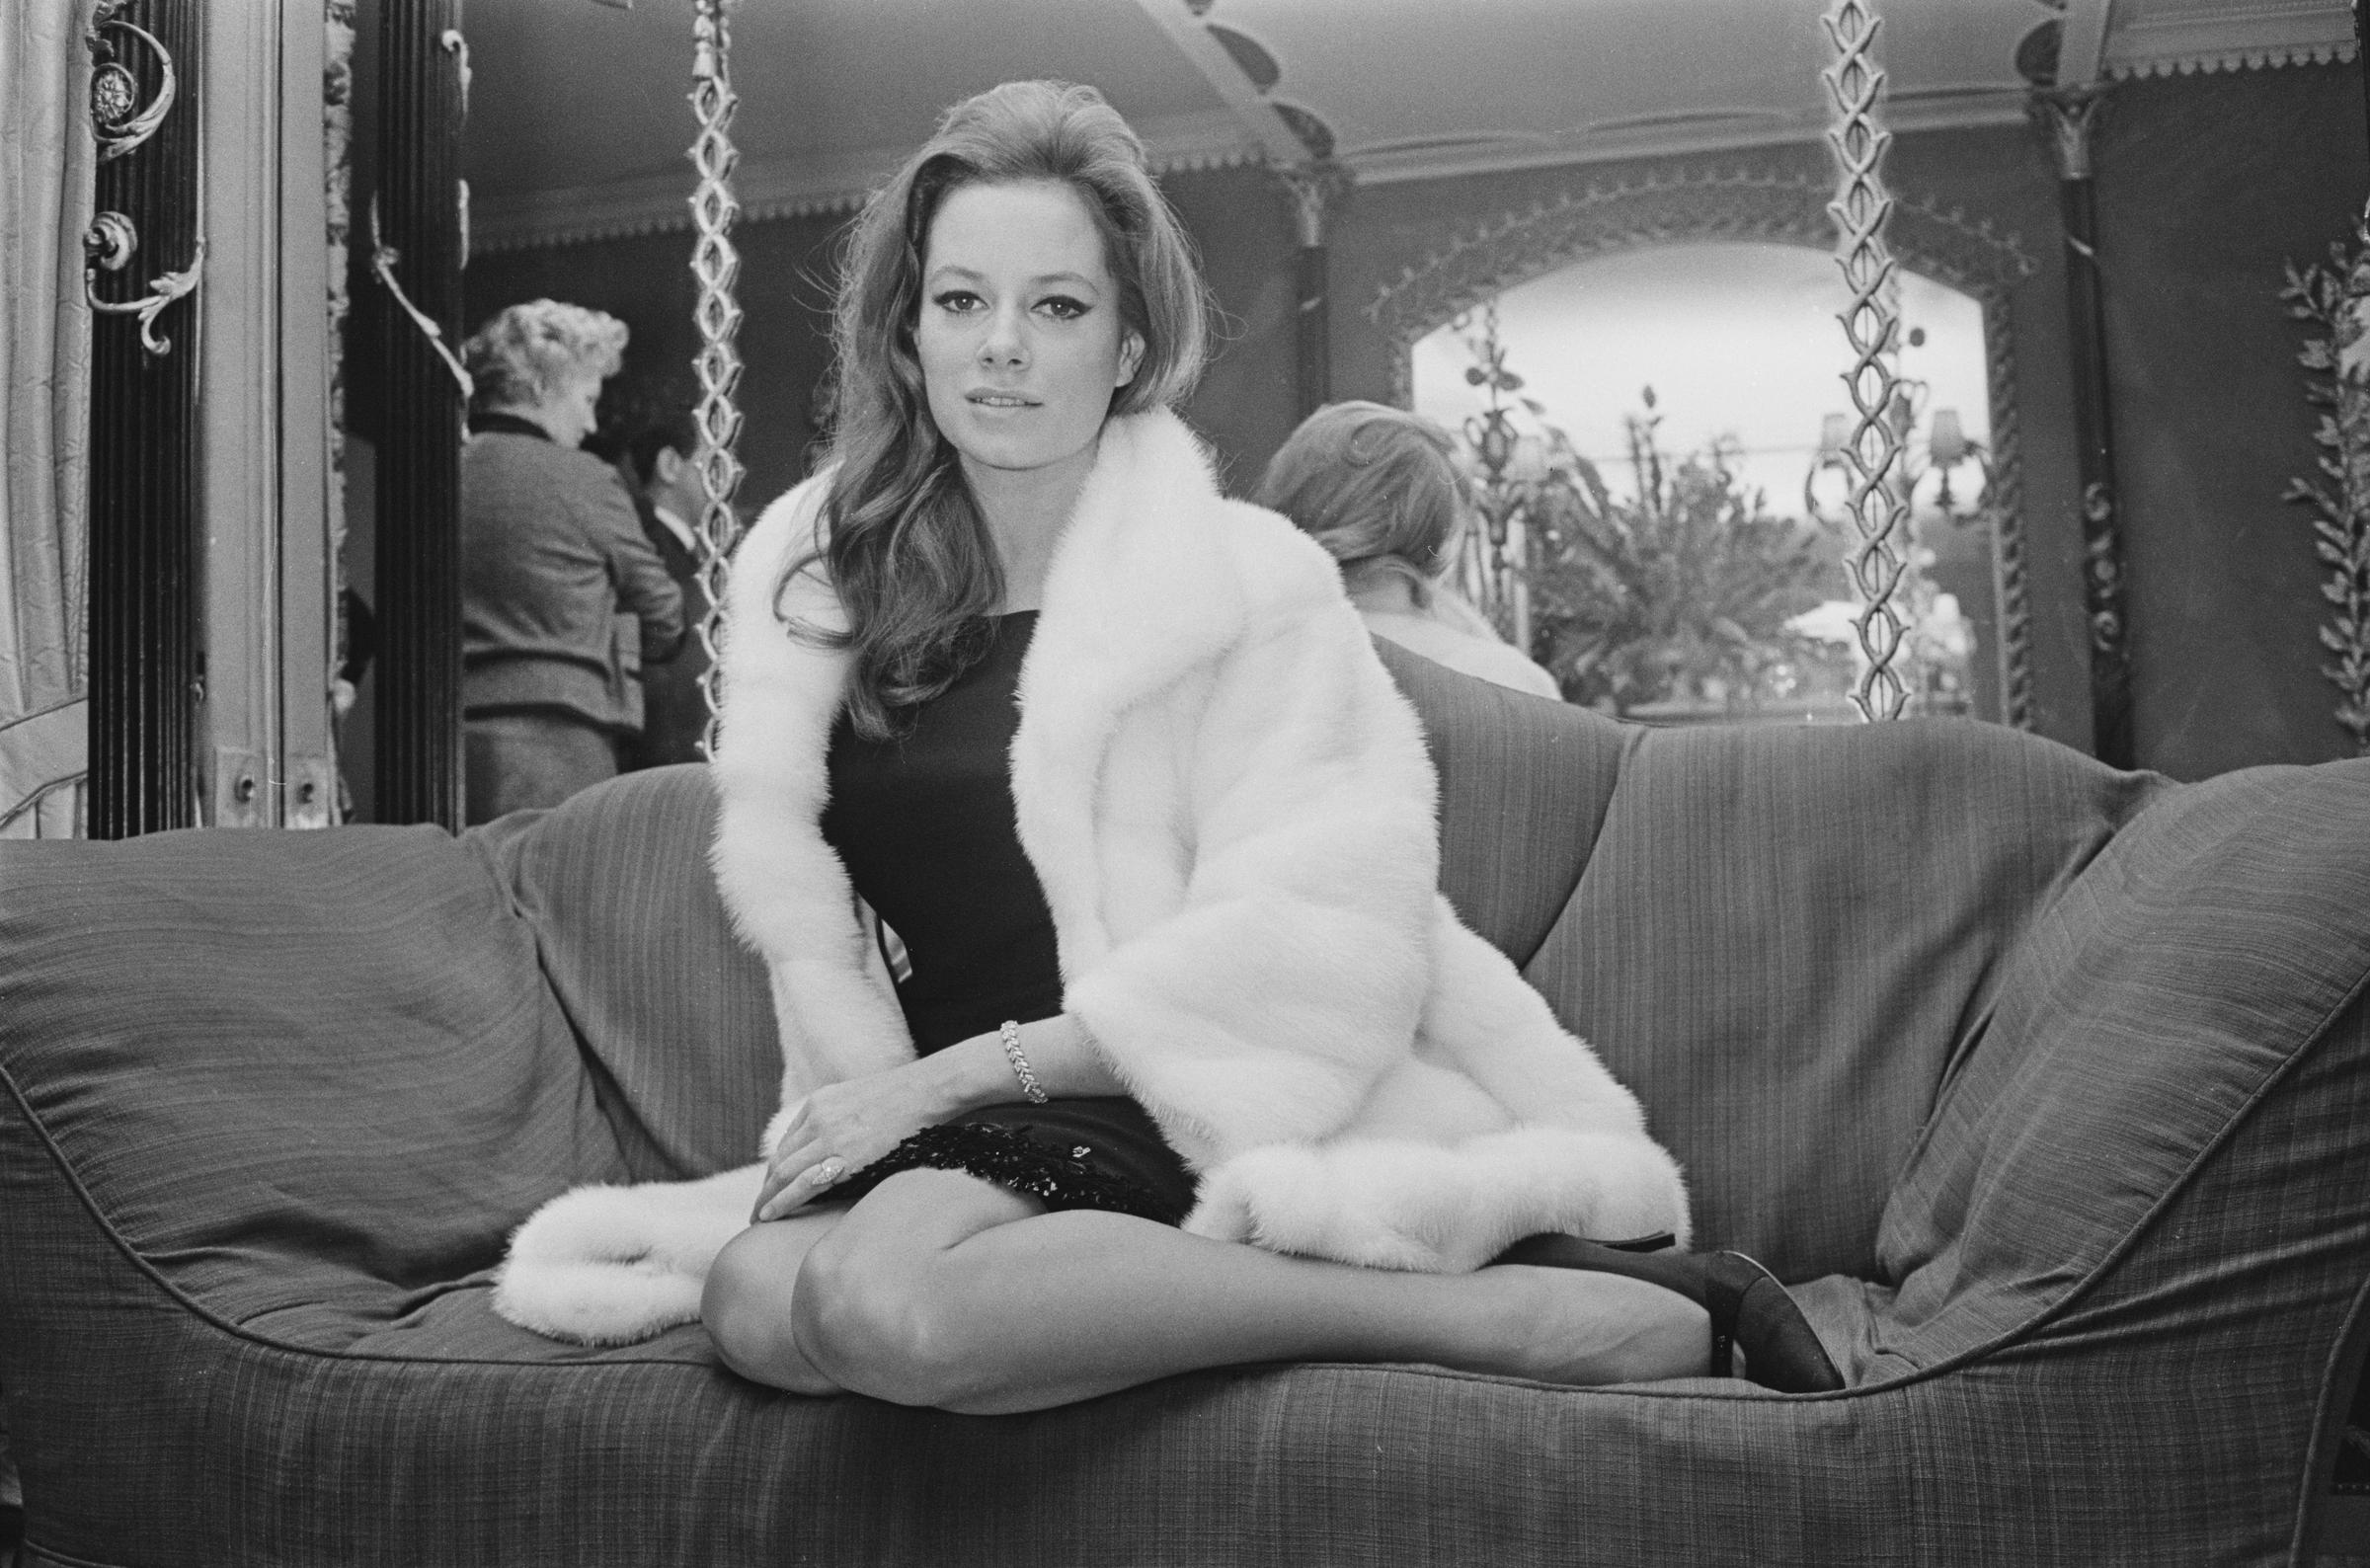 Luciana Paluzzi, pictured wearing a fur coat in London on January 1, 1966. | Source: Getty Images